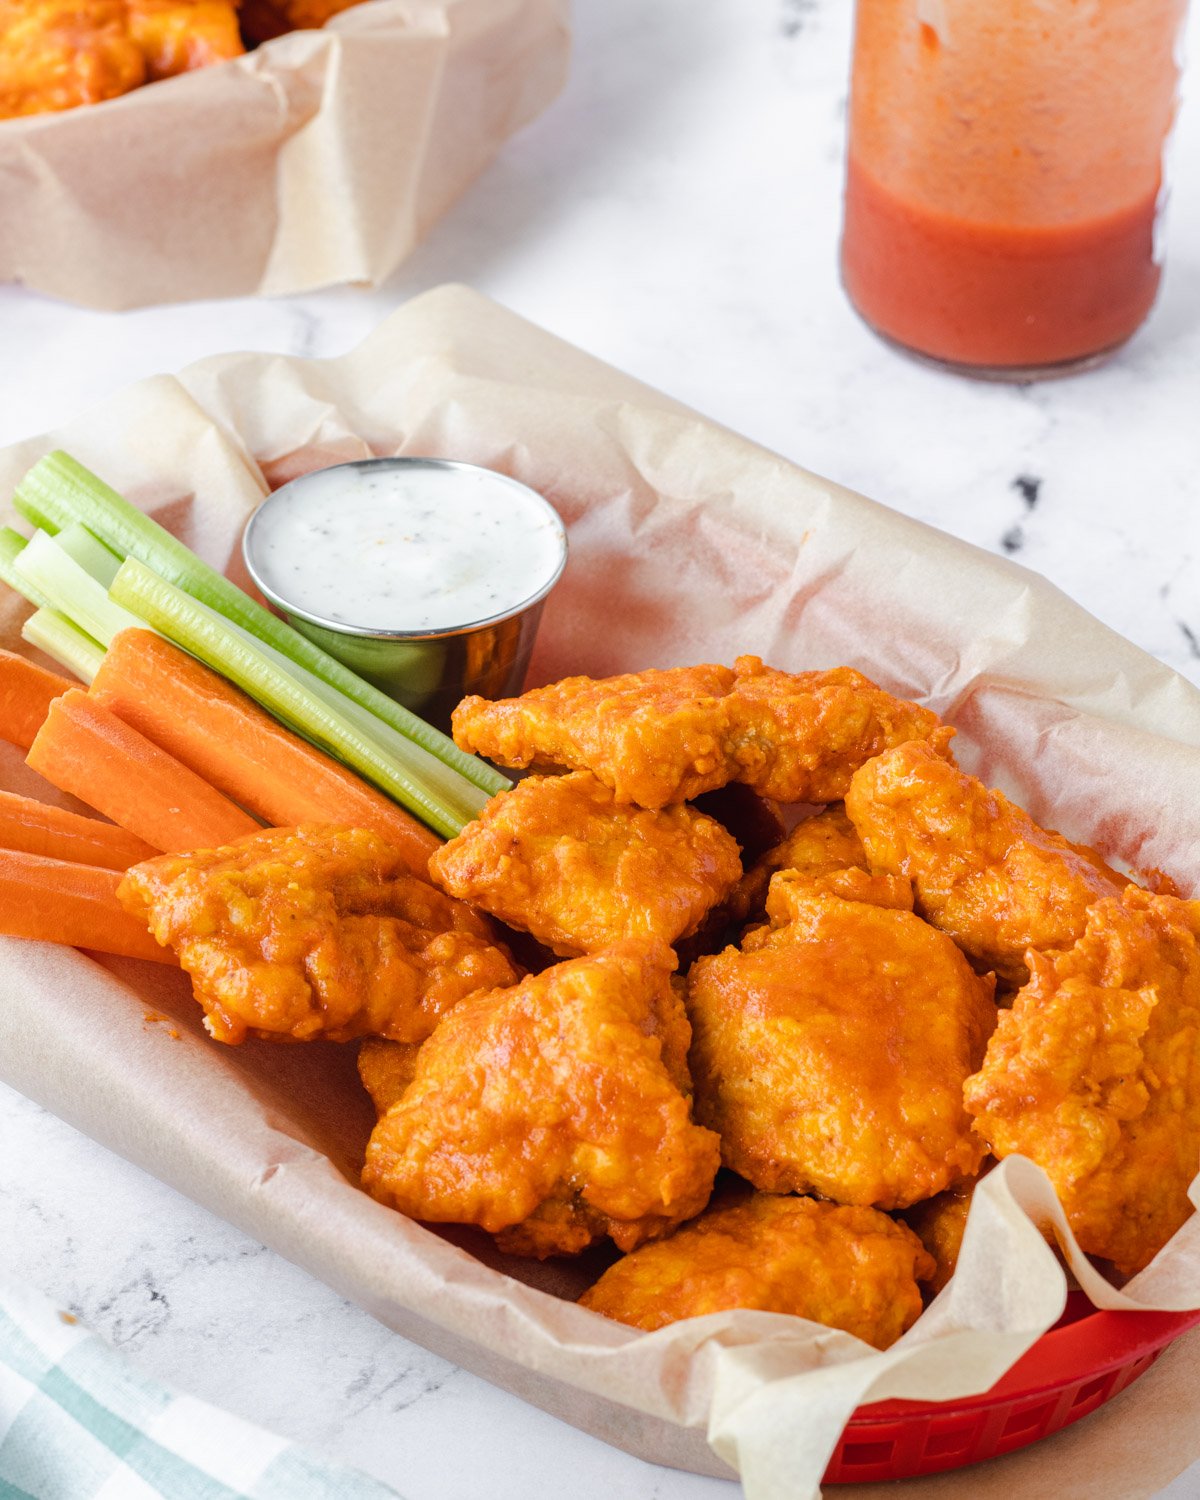 Basket of air fryer boneless chicken wings with ranch dip, carrots, and celery.